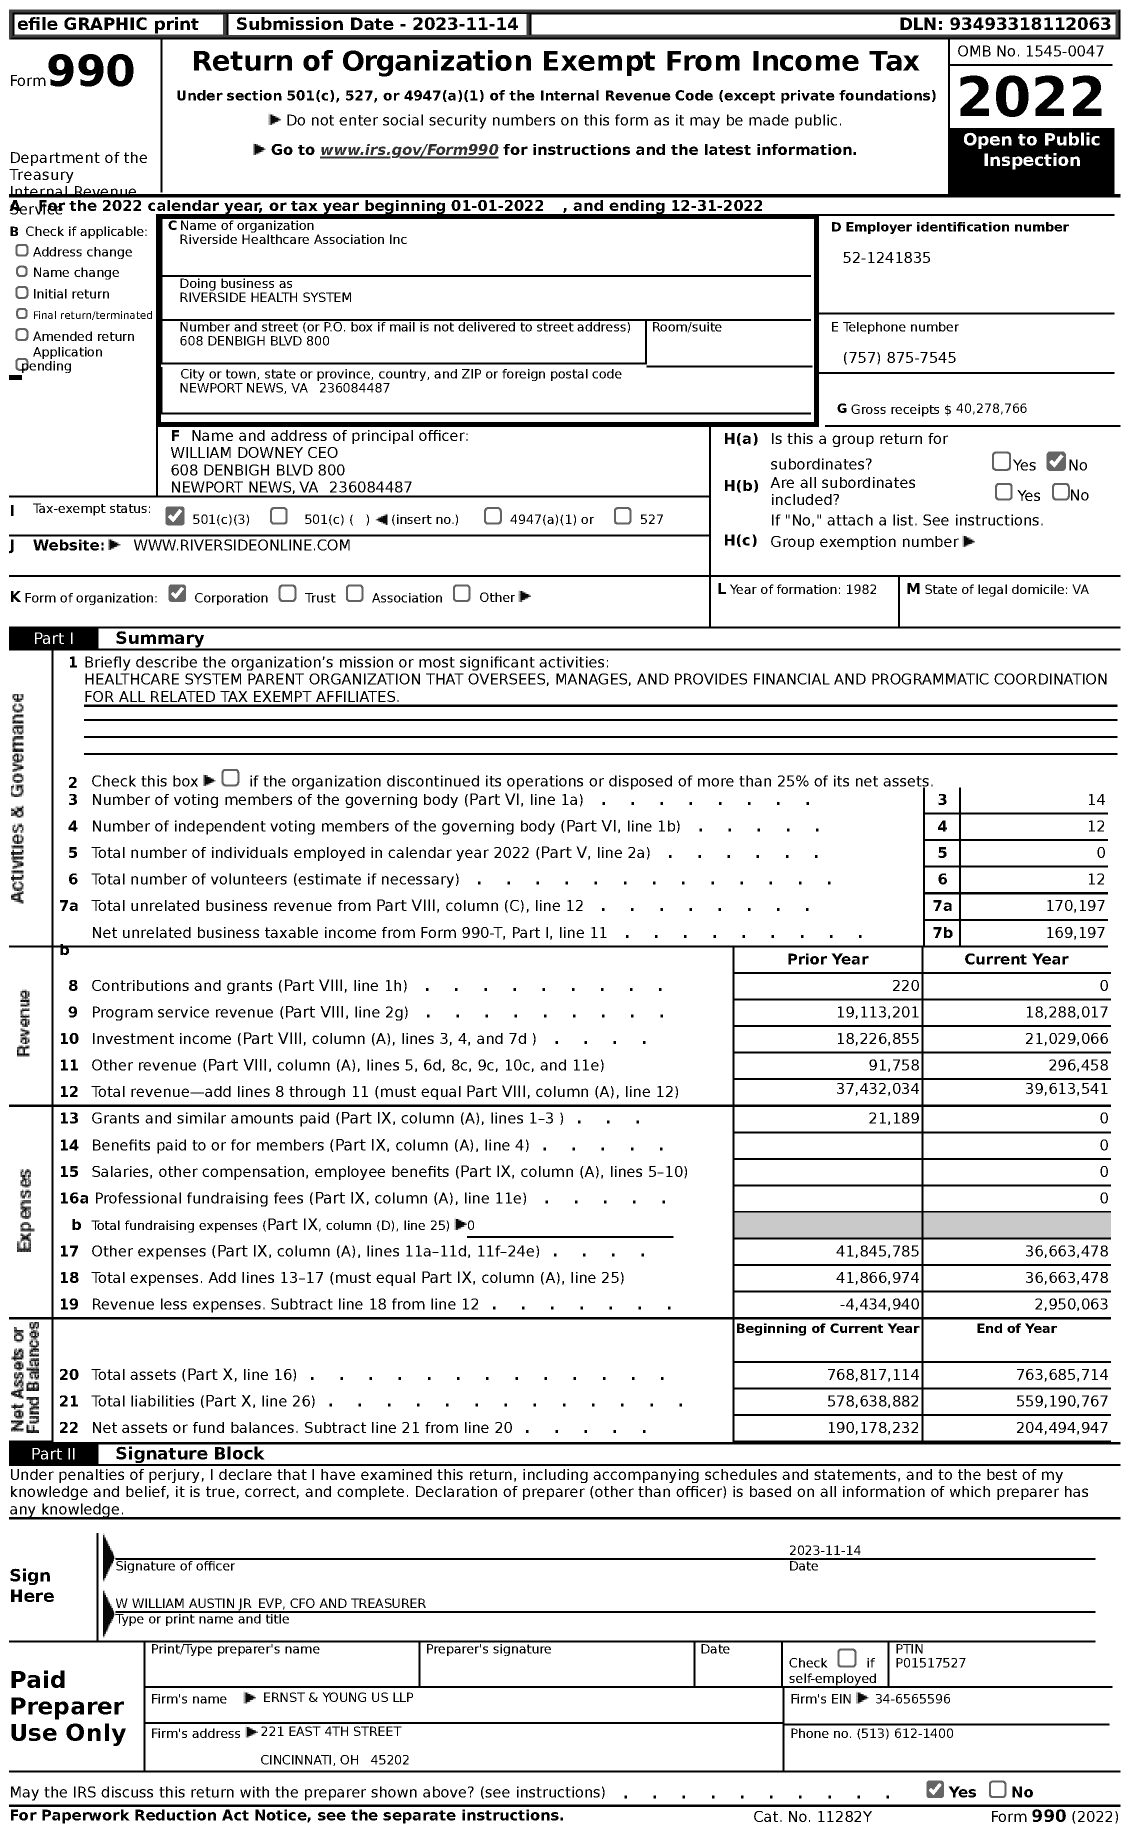 Image of first page of 2022 Form 990 for Riverside Healthcare System (RHS)